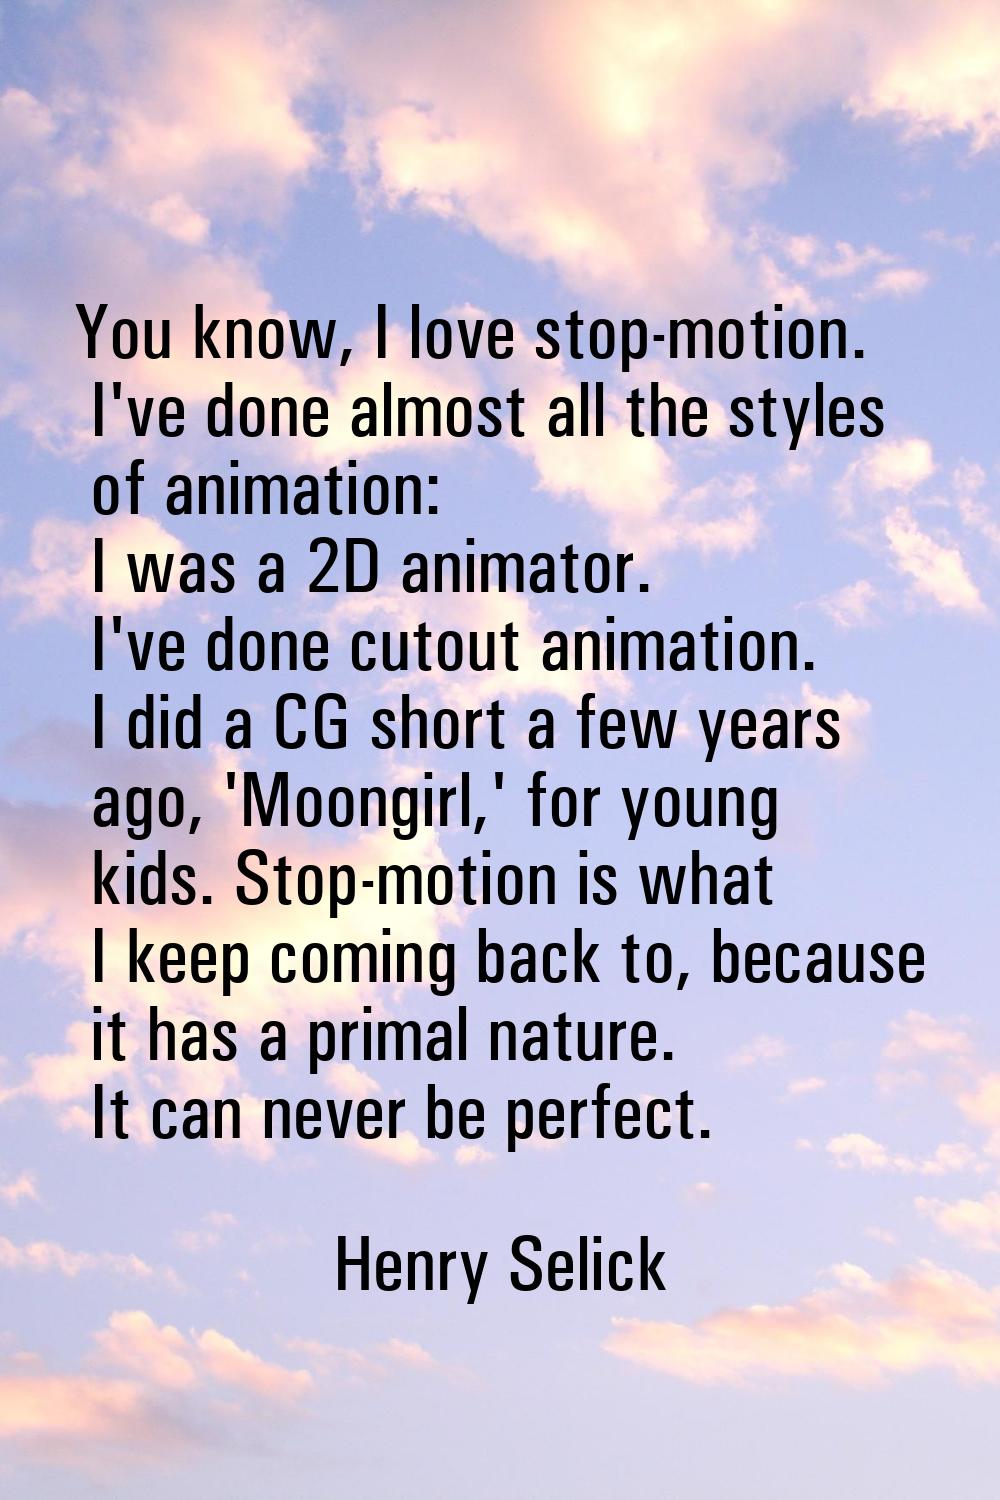 You know, I love stop-motion. I've done almost all the styles of animation: I was a 2D animator. I'